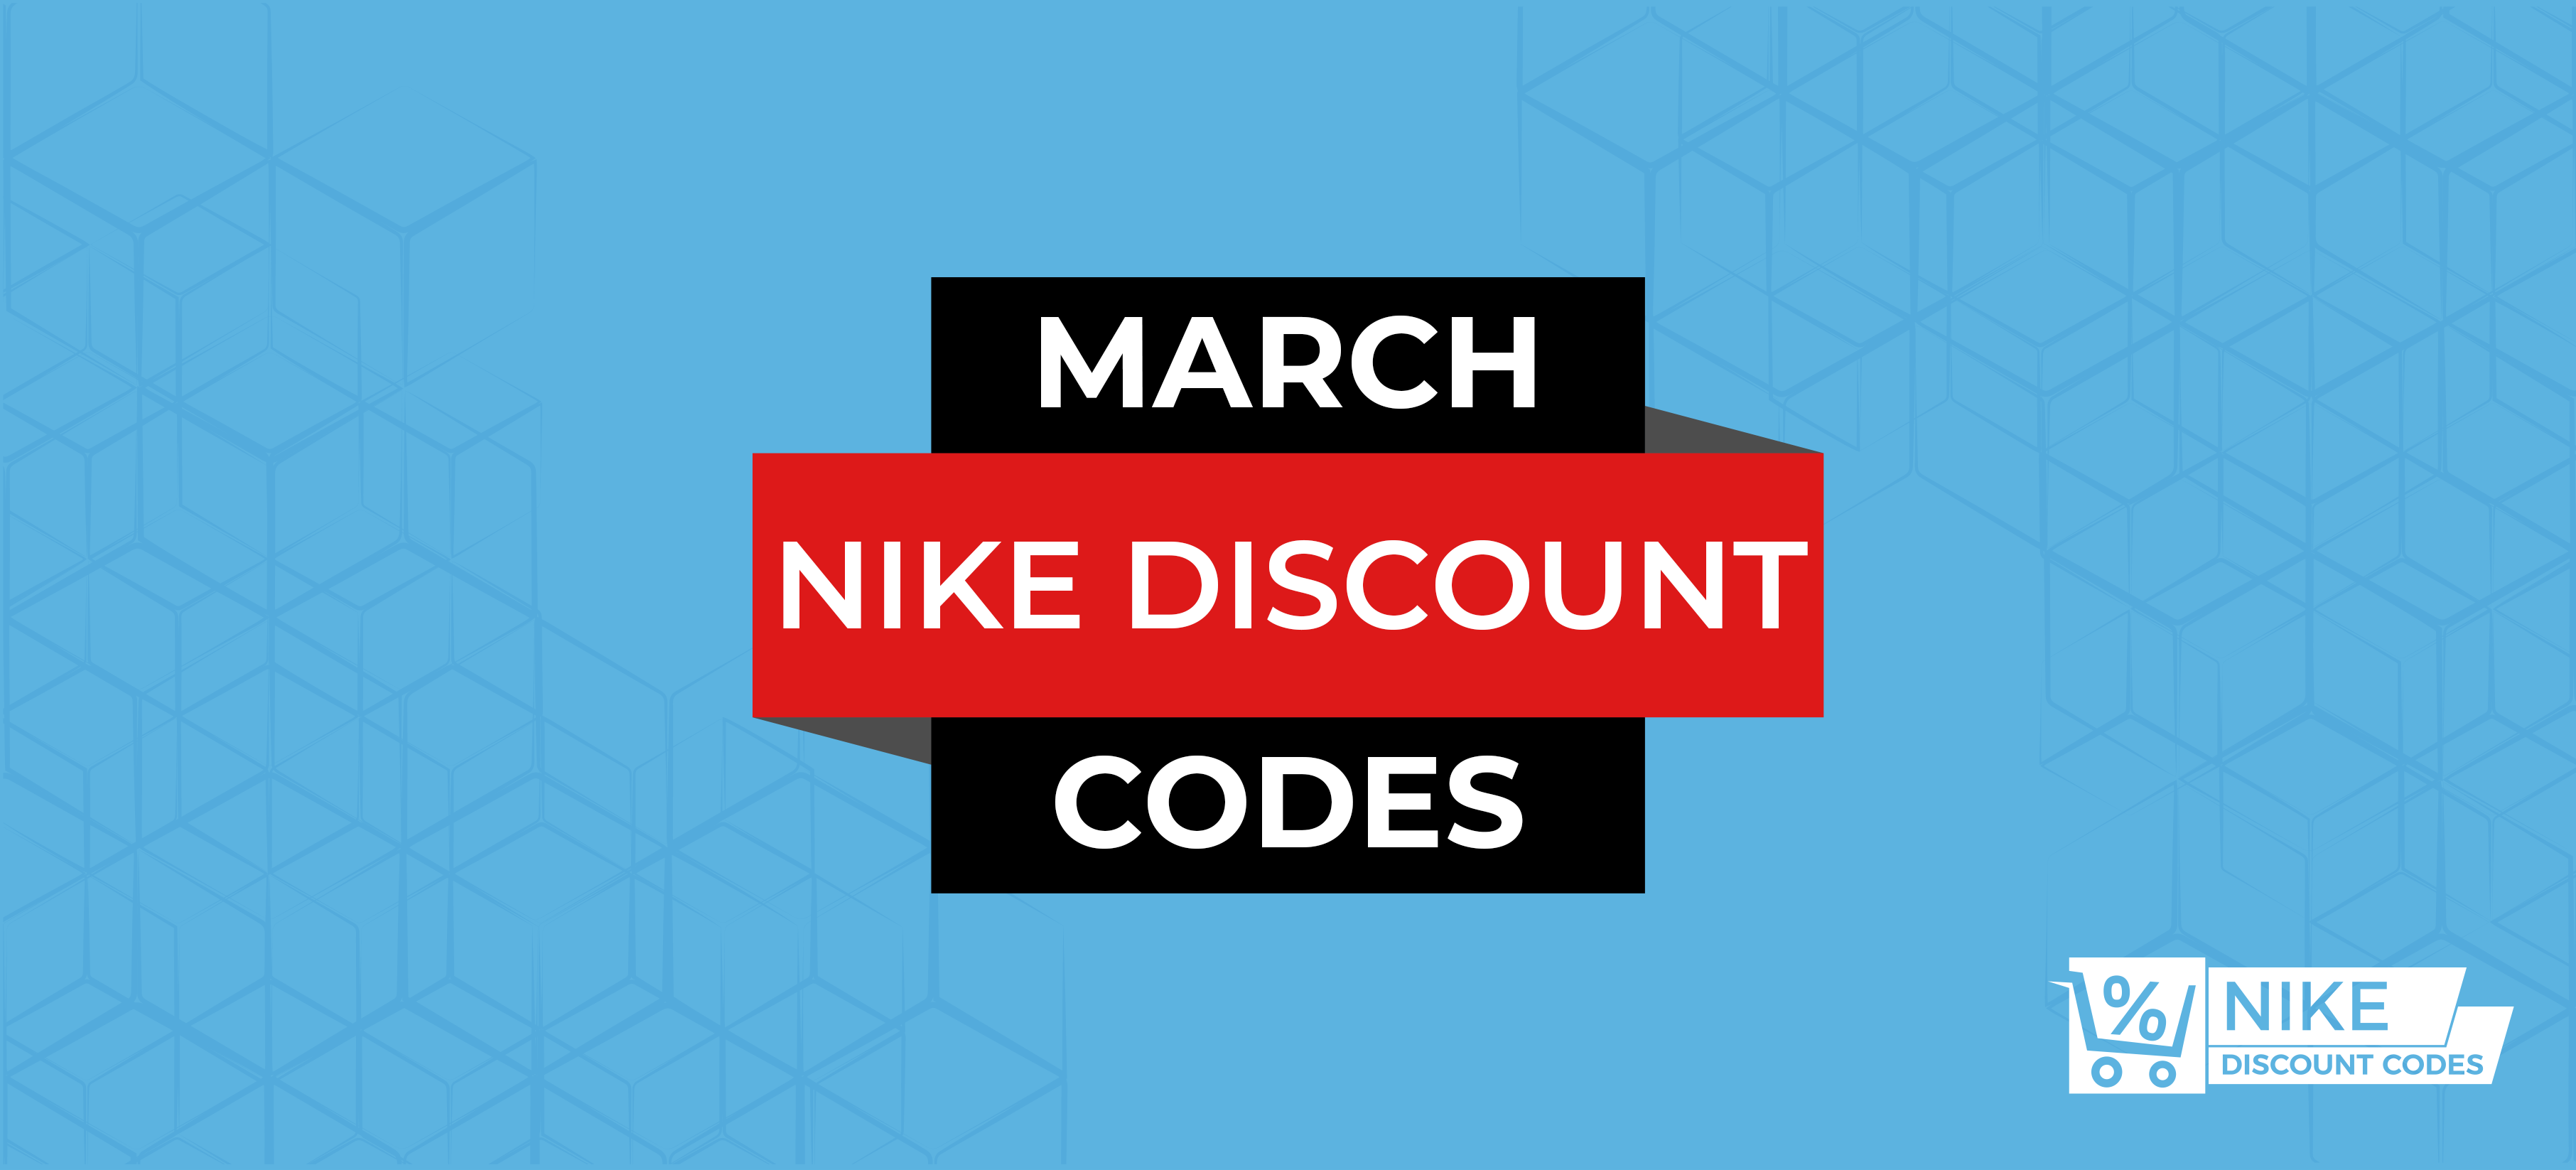 March 2020 | Nike Discount Codes